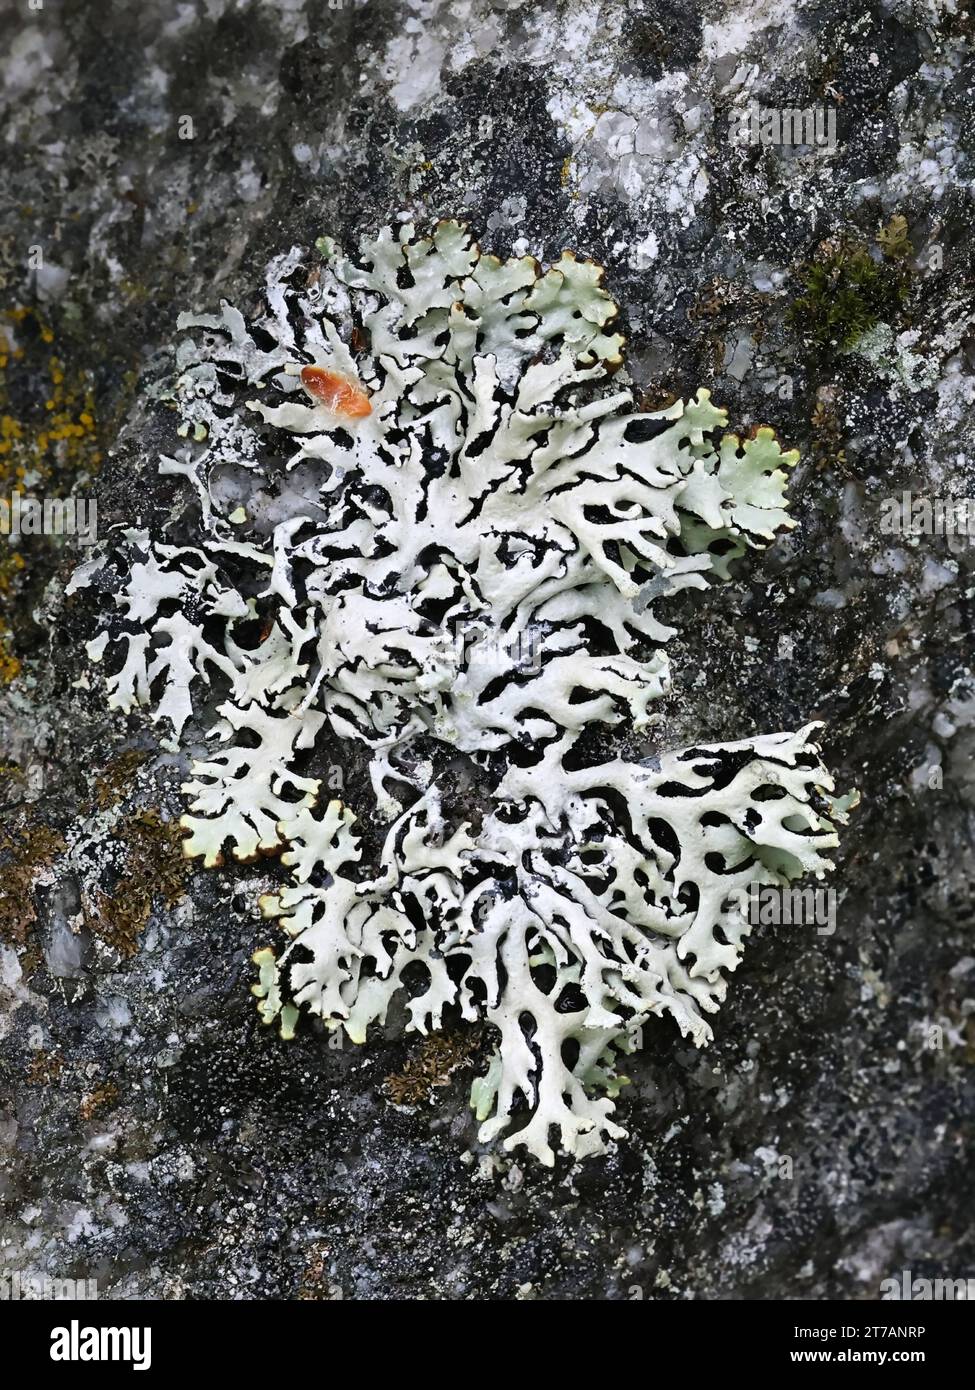 Hypogymnia vittata, a monks-hood lichen growing on rock surface in Finland, no common English name Stock Photo